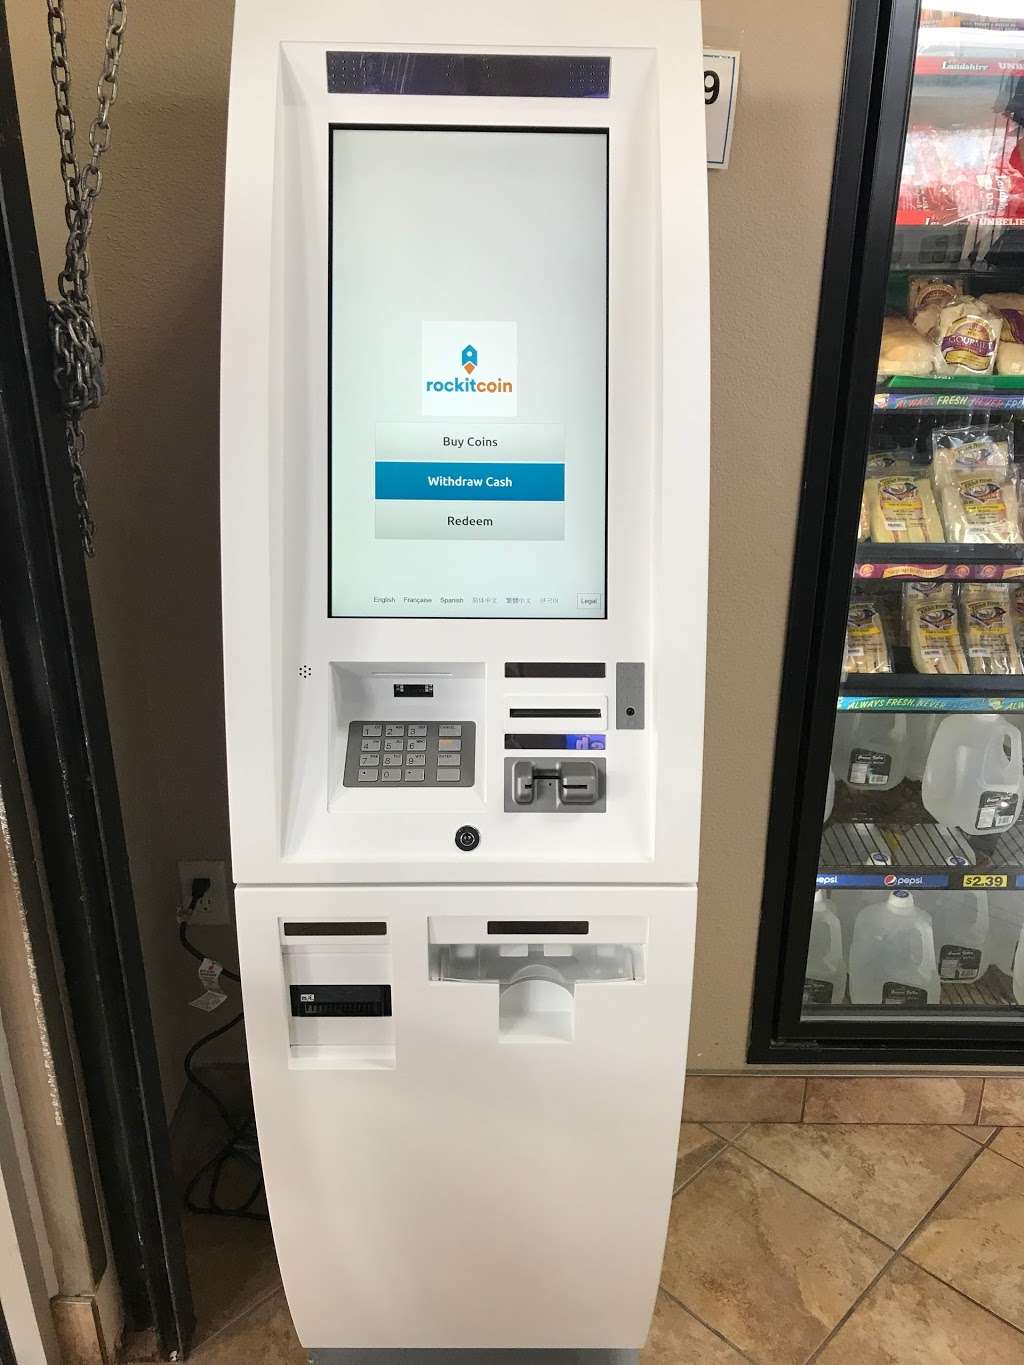 How to buy bitcoin from rockitcoin atm